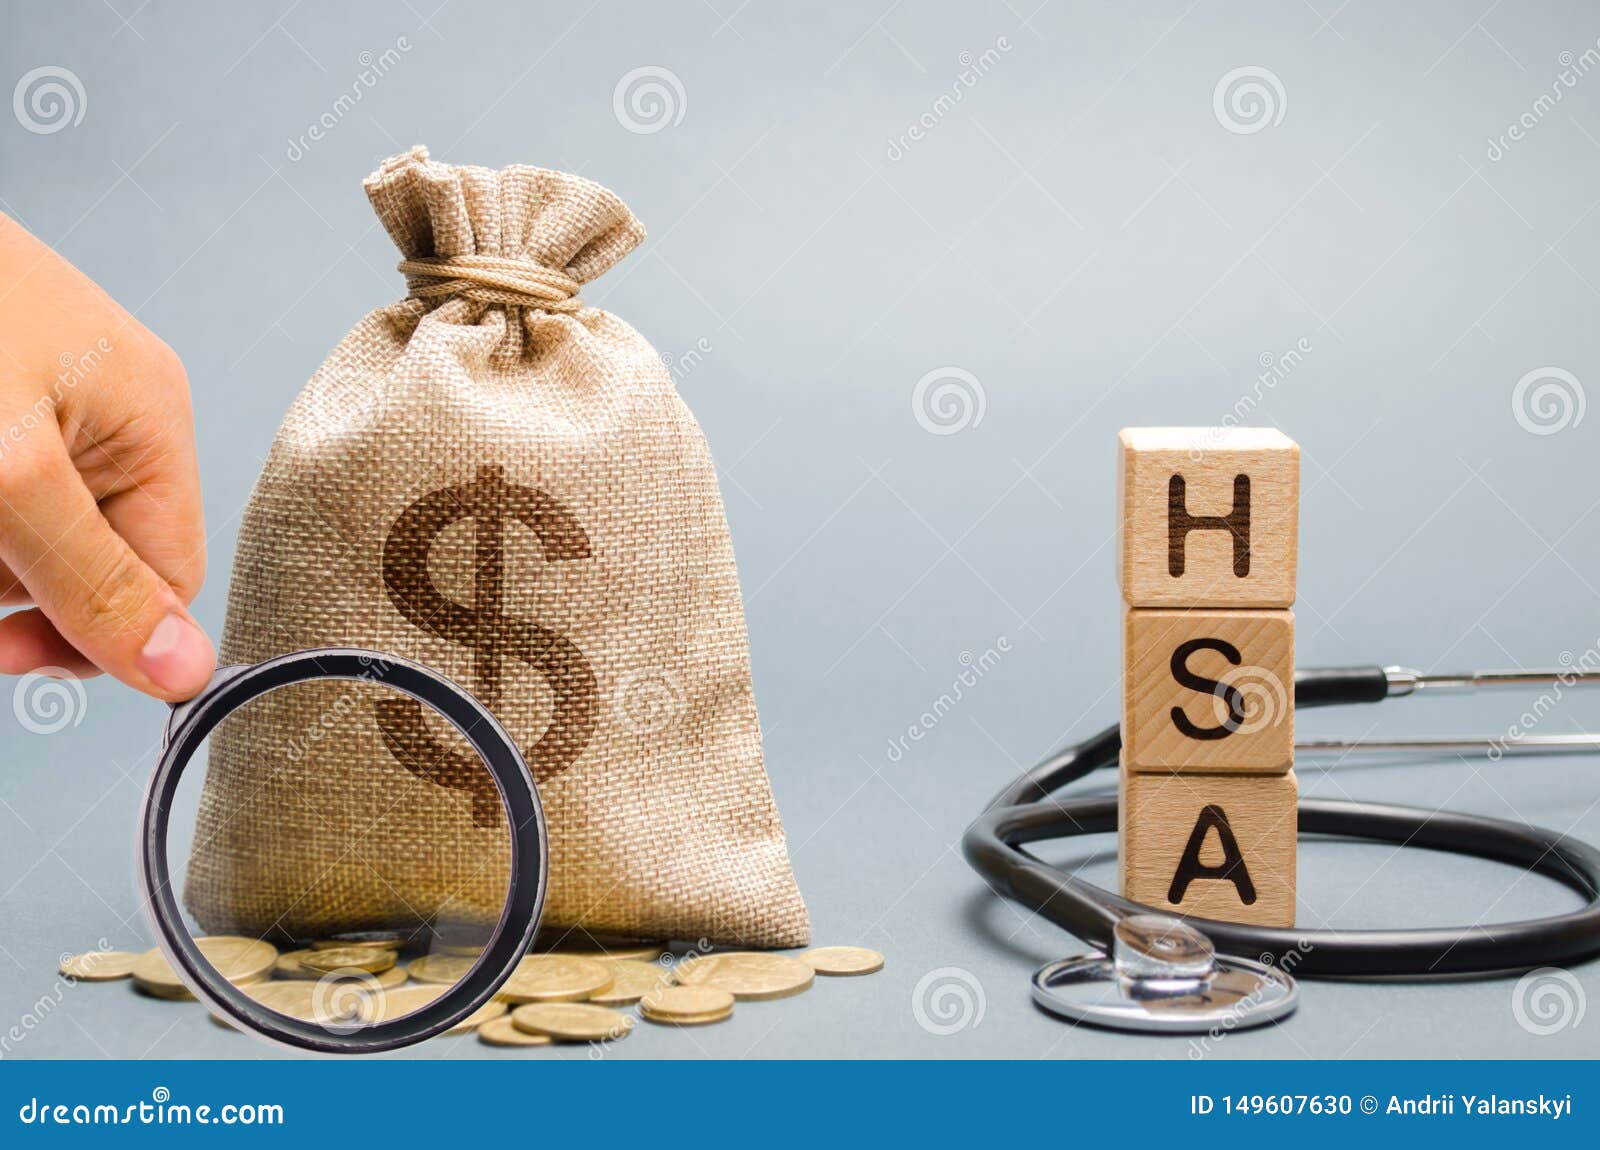 wooden blocks with the word hsa and money bag with stethoscope. health savings account. health care. health insurance. investments